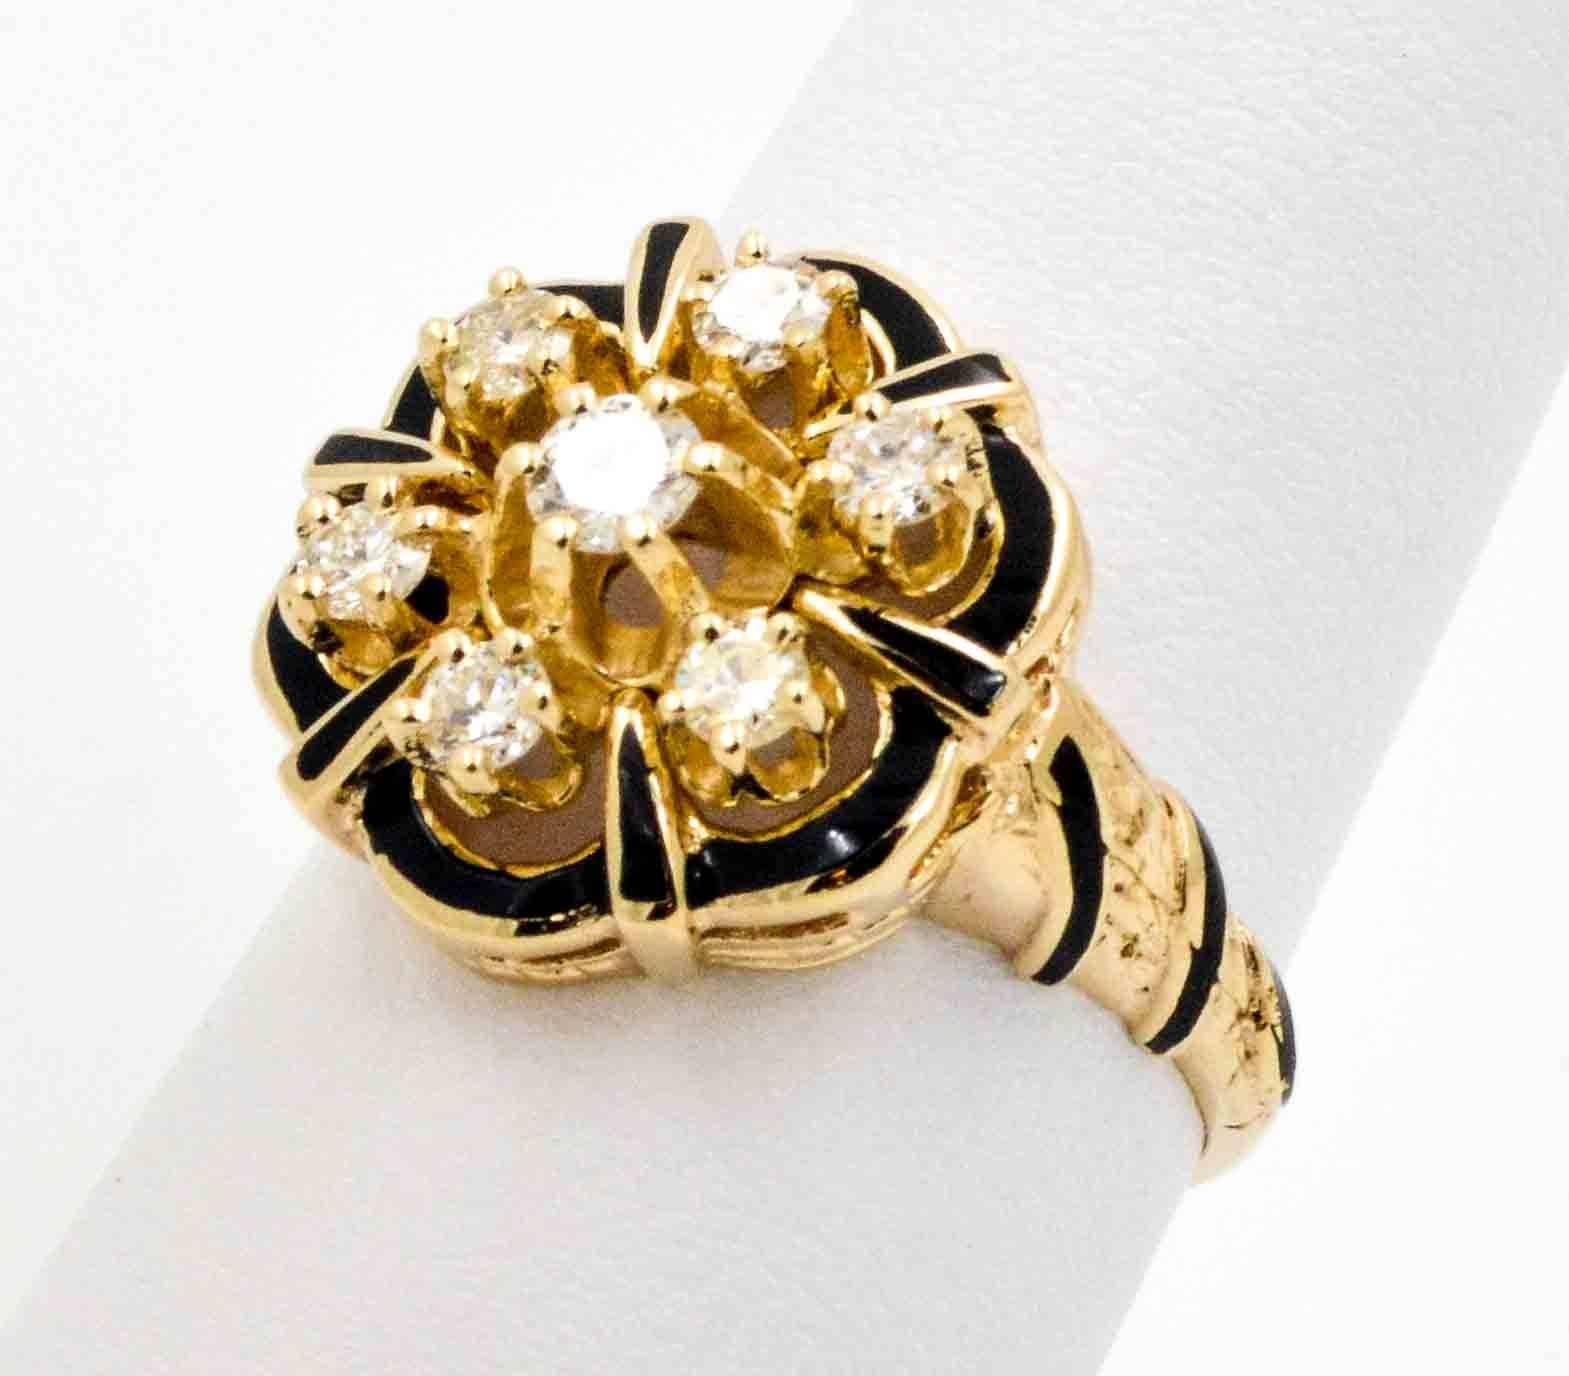 Getting dressed for the evening is even more enjoyable with this dazzling 14kt yellow gold ring featuring seven round brilliant cut diamonds set in a flower design. The seven round brilliant cut diamonds have an approximate combined weight of 0.40